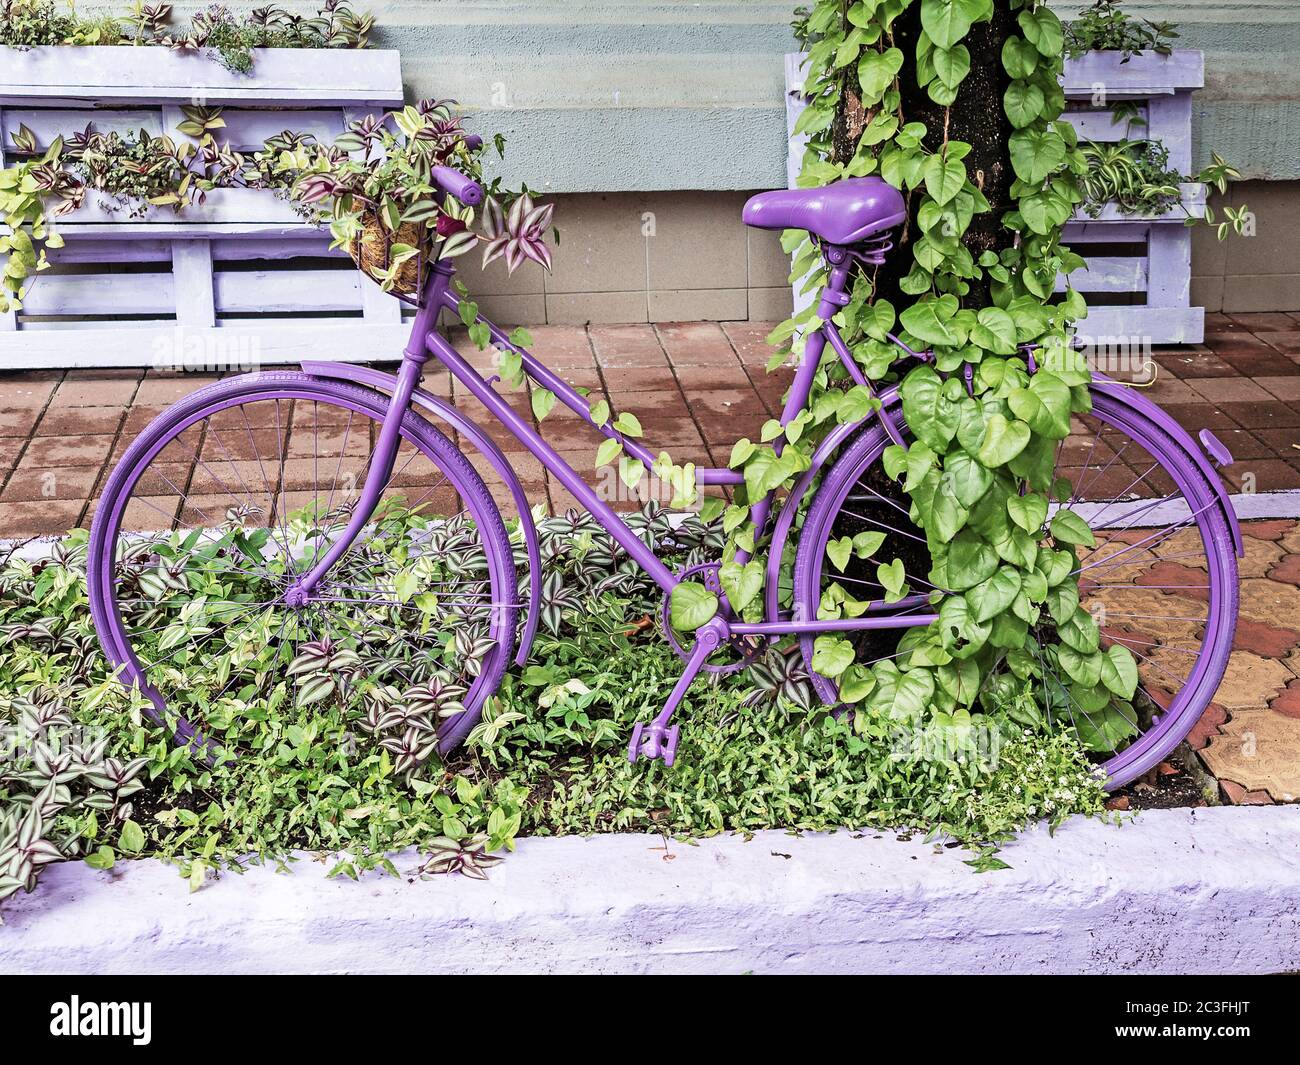 A bicycle painted in purple stands on green leaves near an overgrown ivy tree Stock Photo